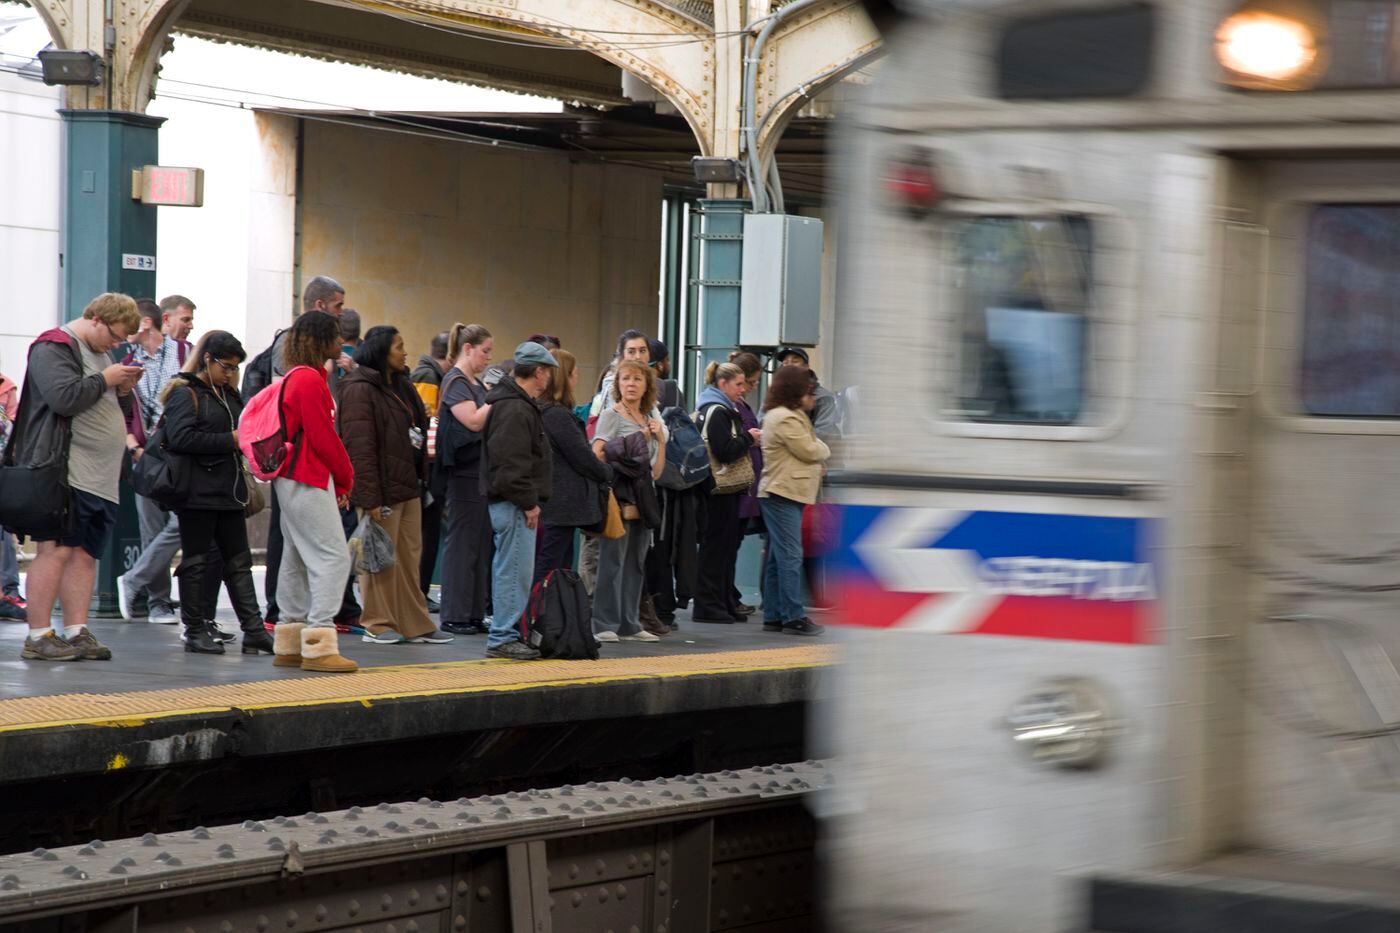 A Regional Rail train arrives as commuters wait on the platform at 30th Street Station during evening rush hour.